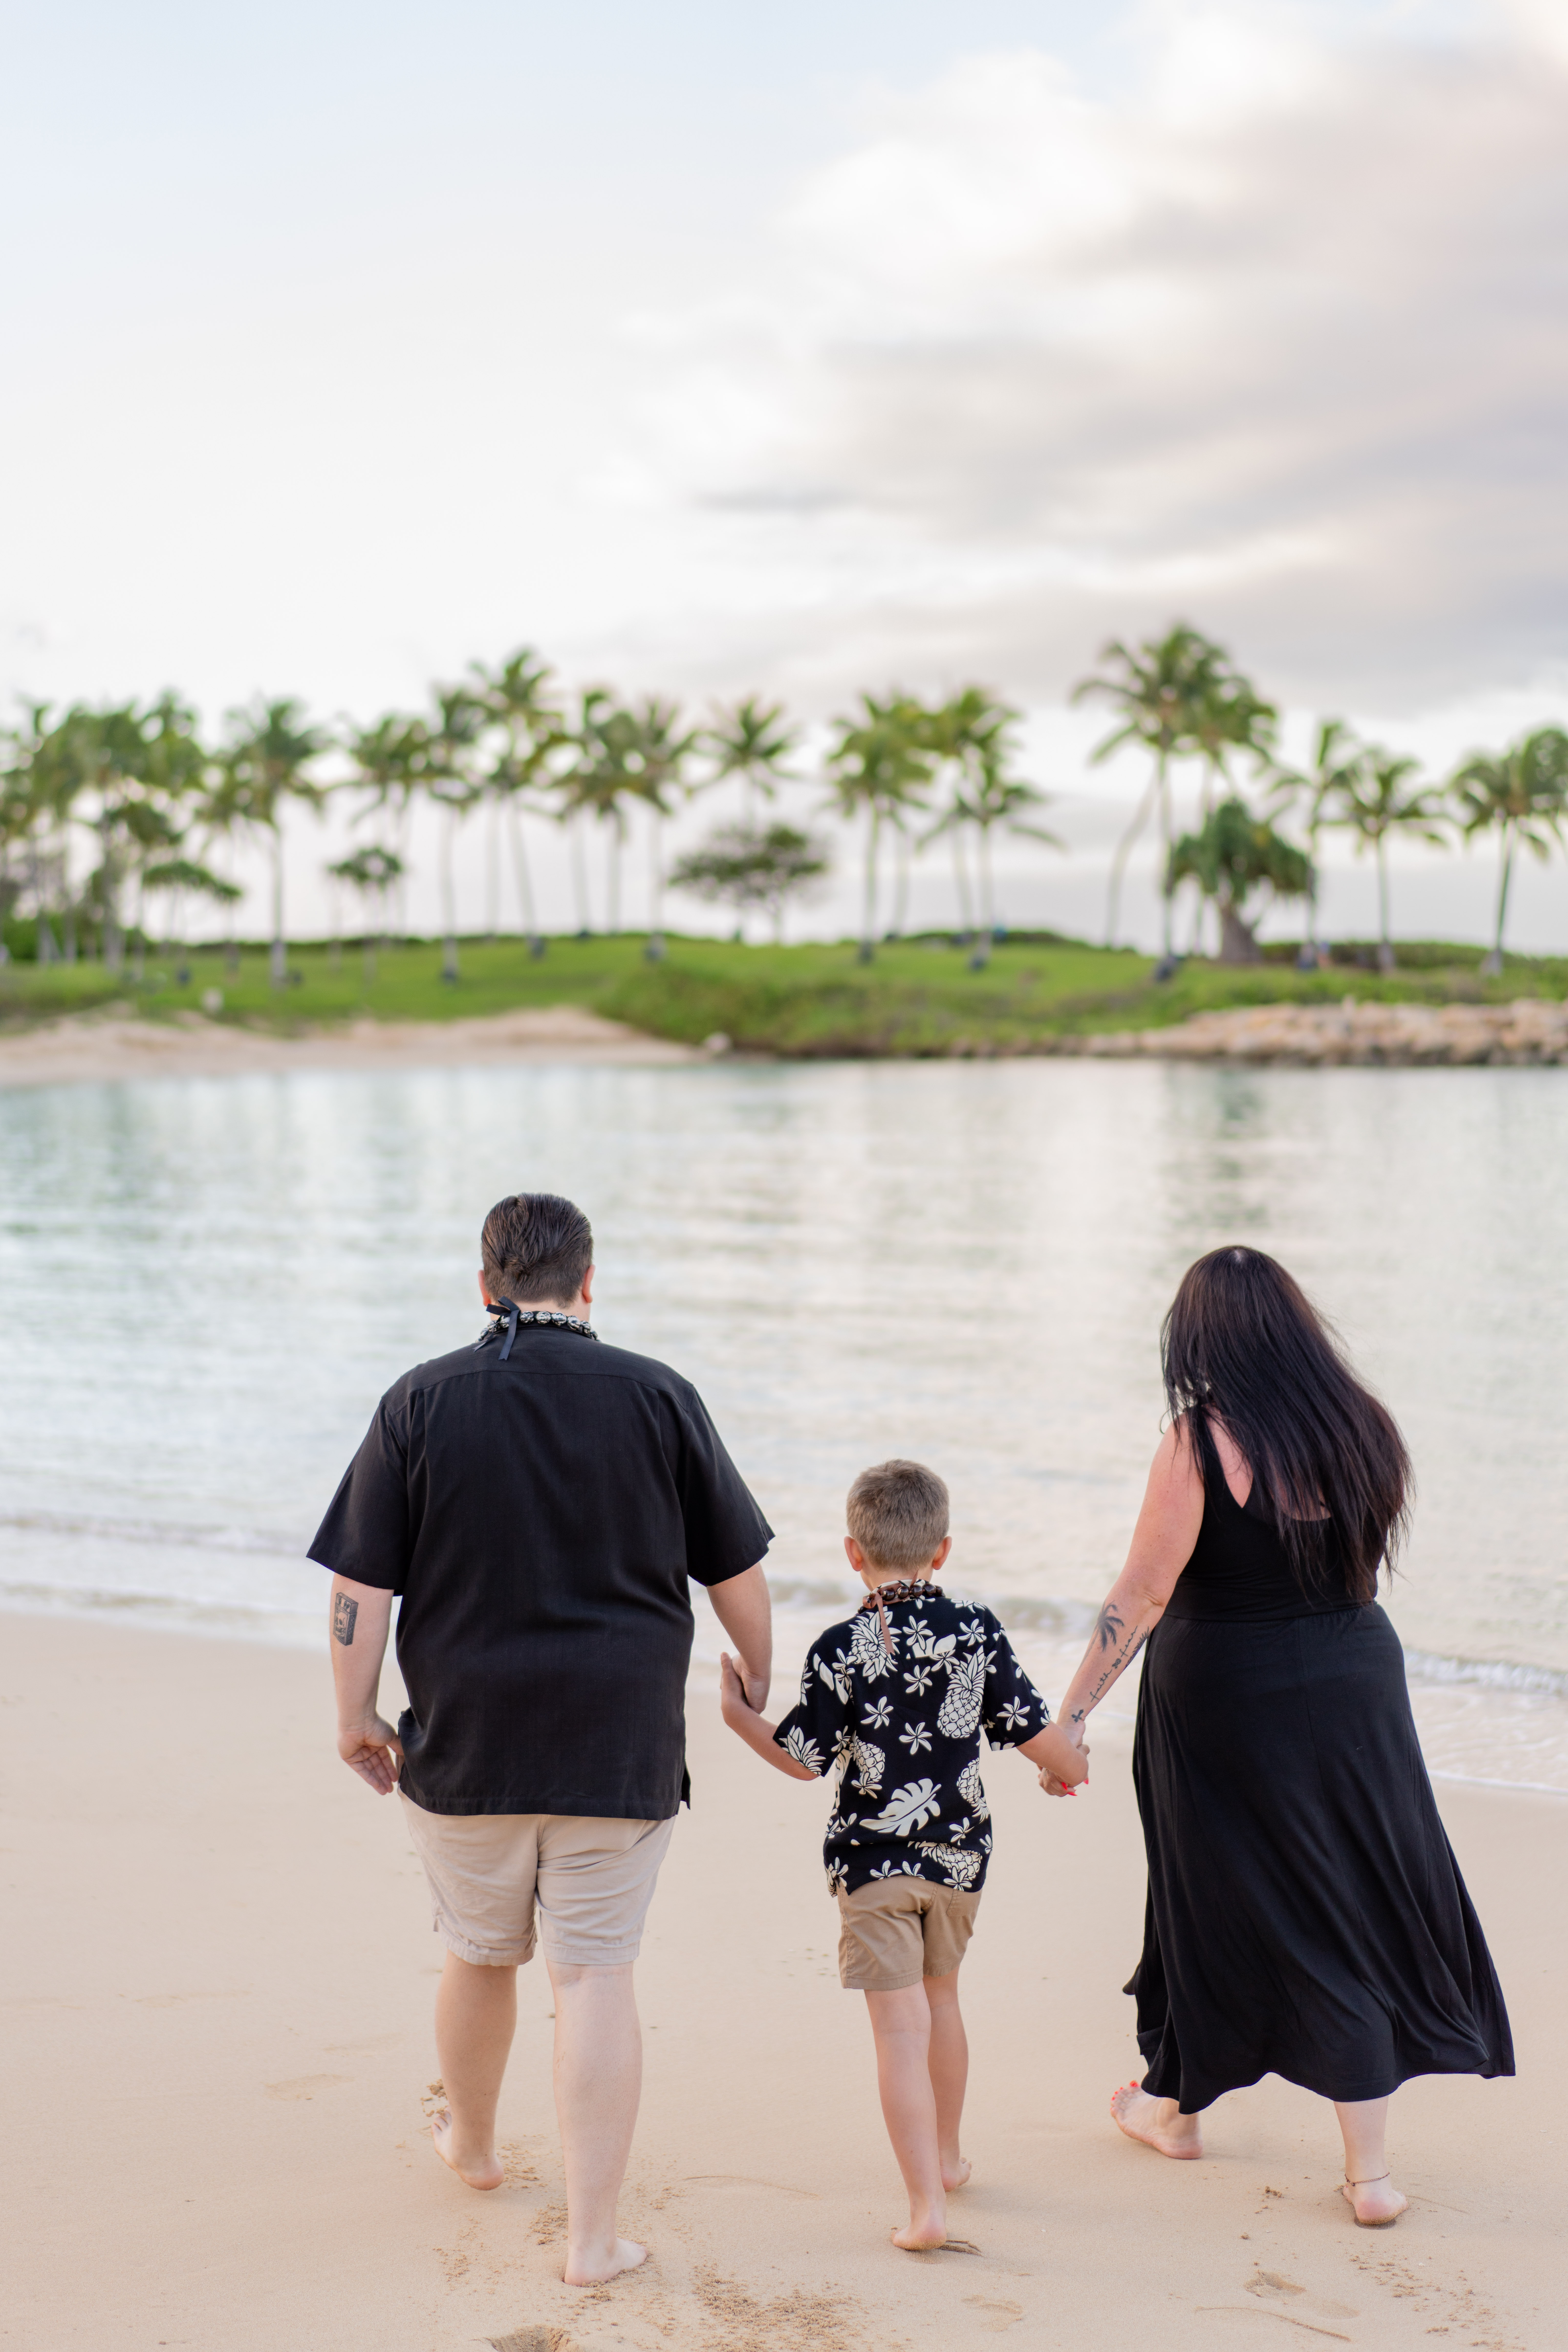 a family of three - dad, mom and young son - walk away from the camera hand in hand on the beach with palm trees and cloudy skies ahead of them